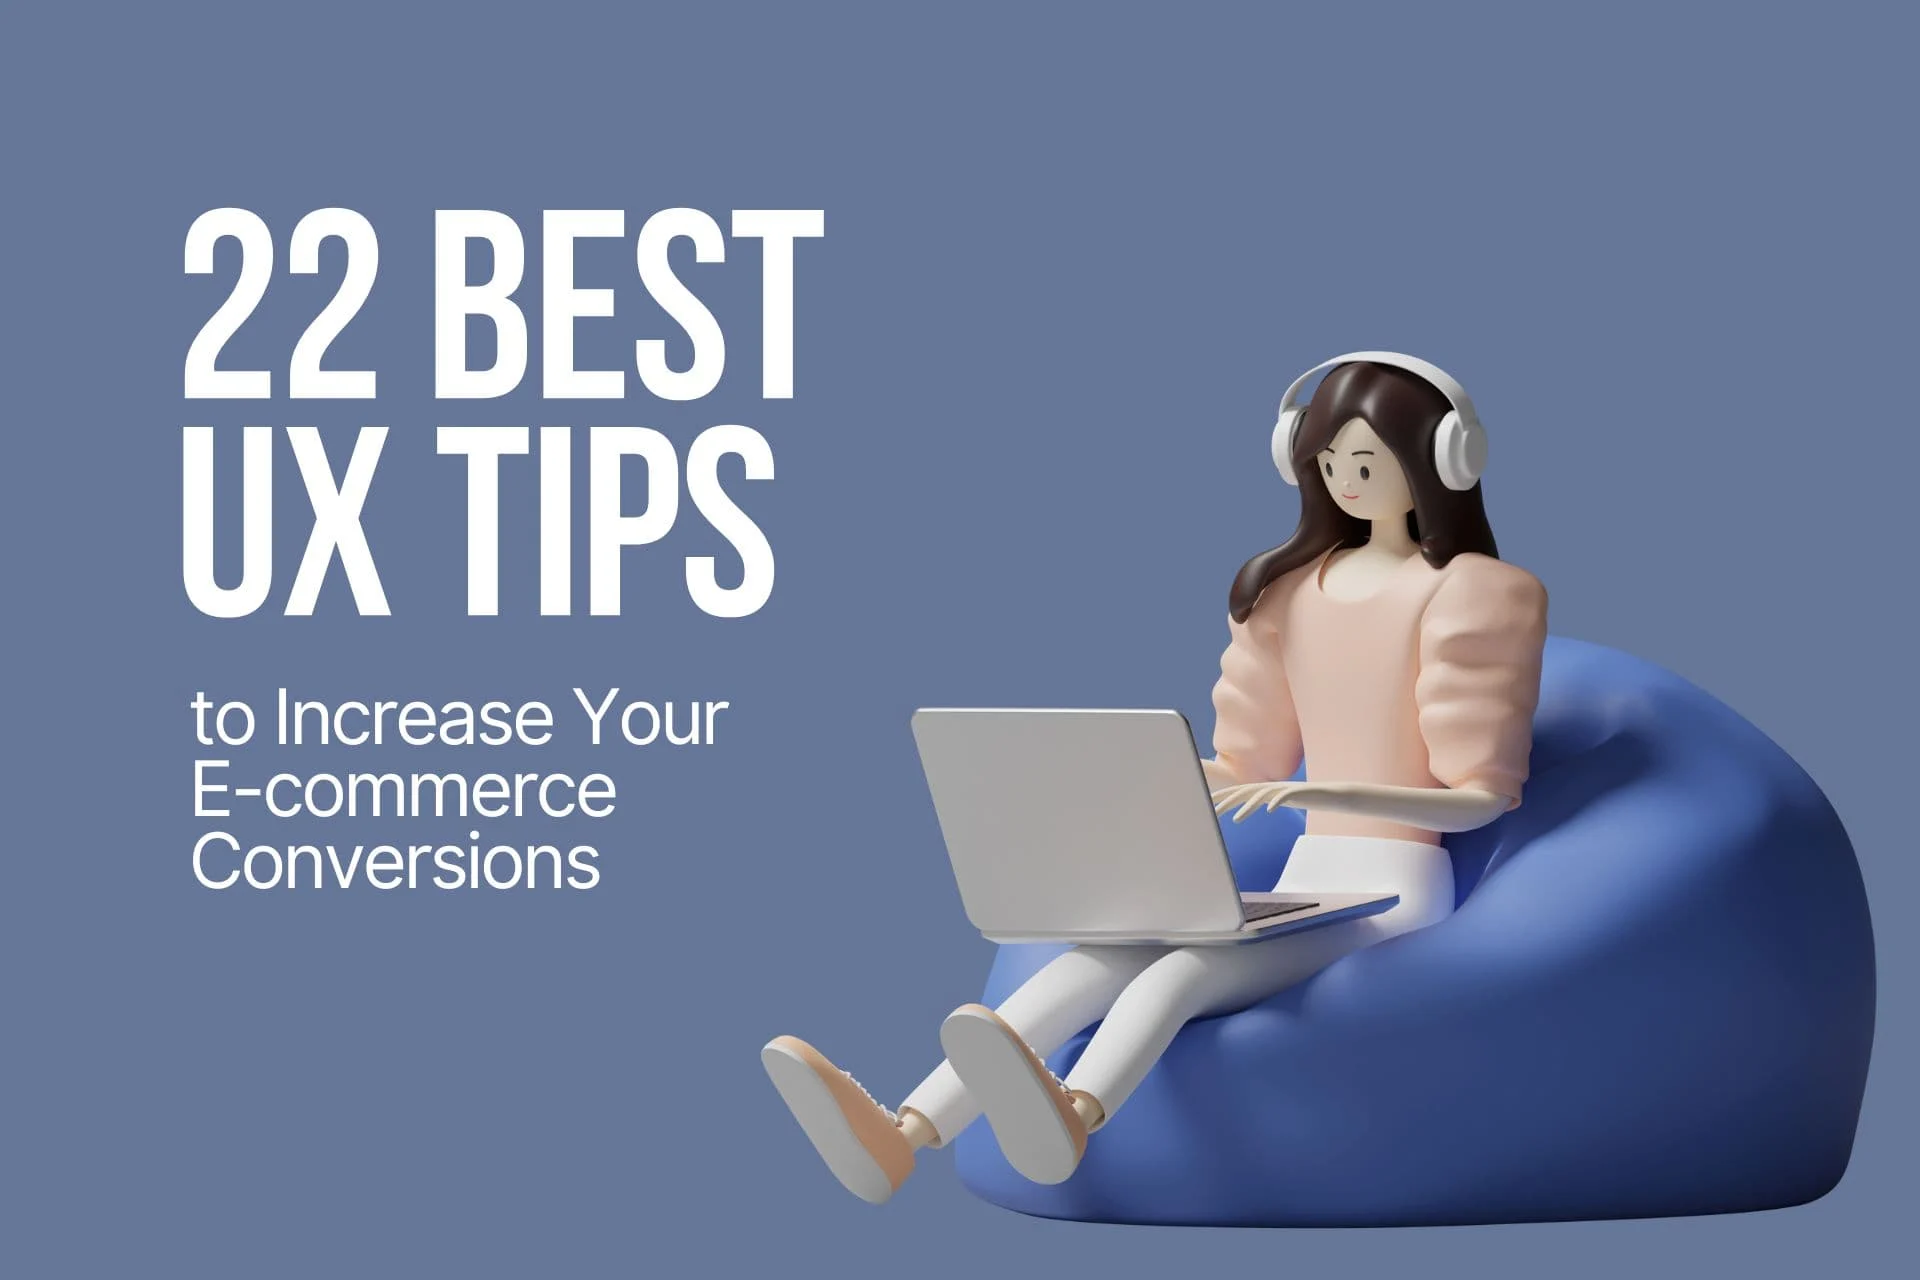 22 Best UX Tips to Increase Your E-commerce Conversions